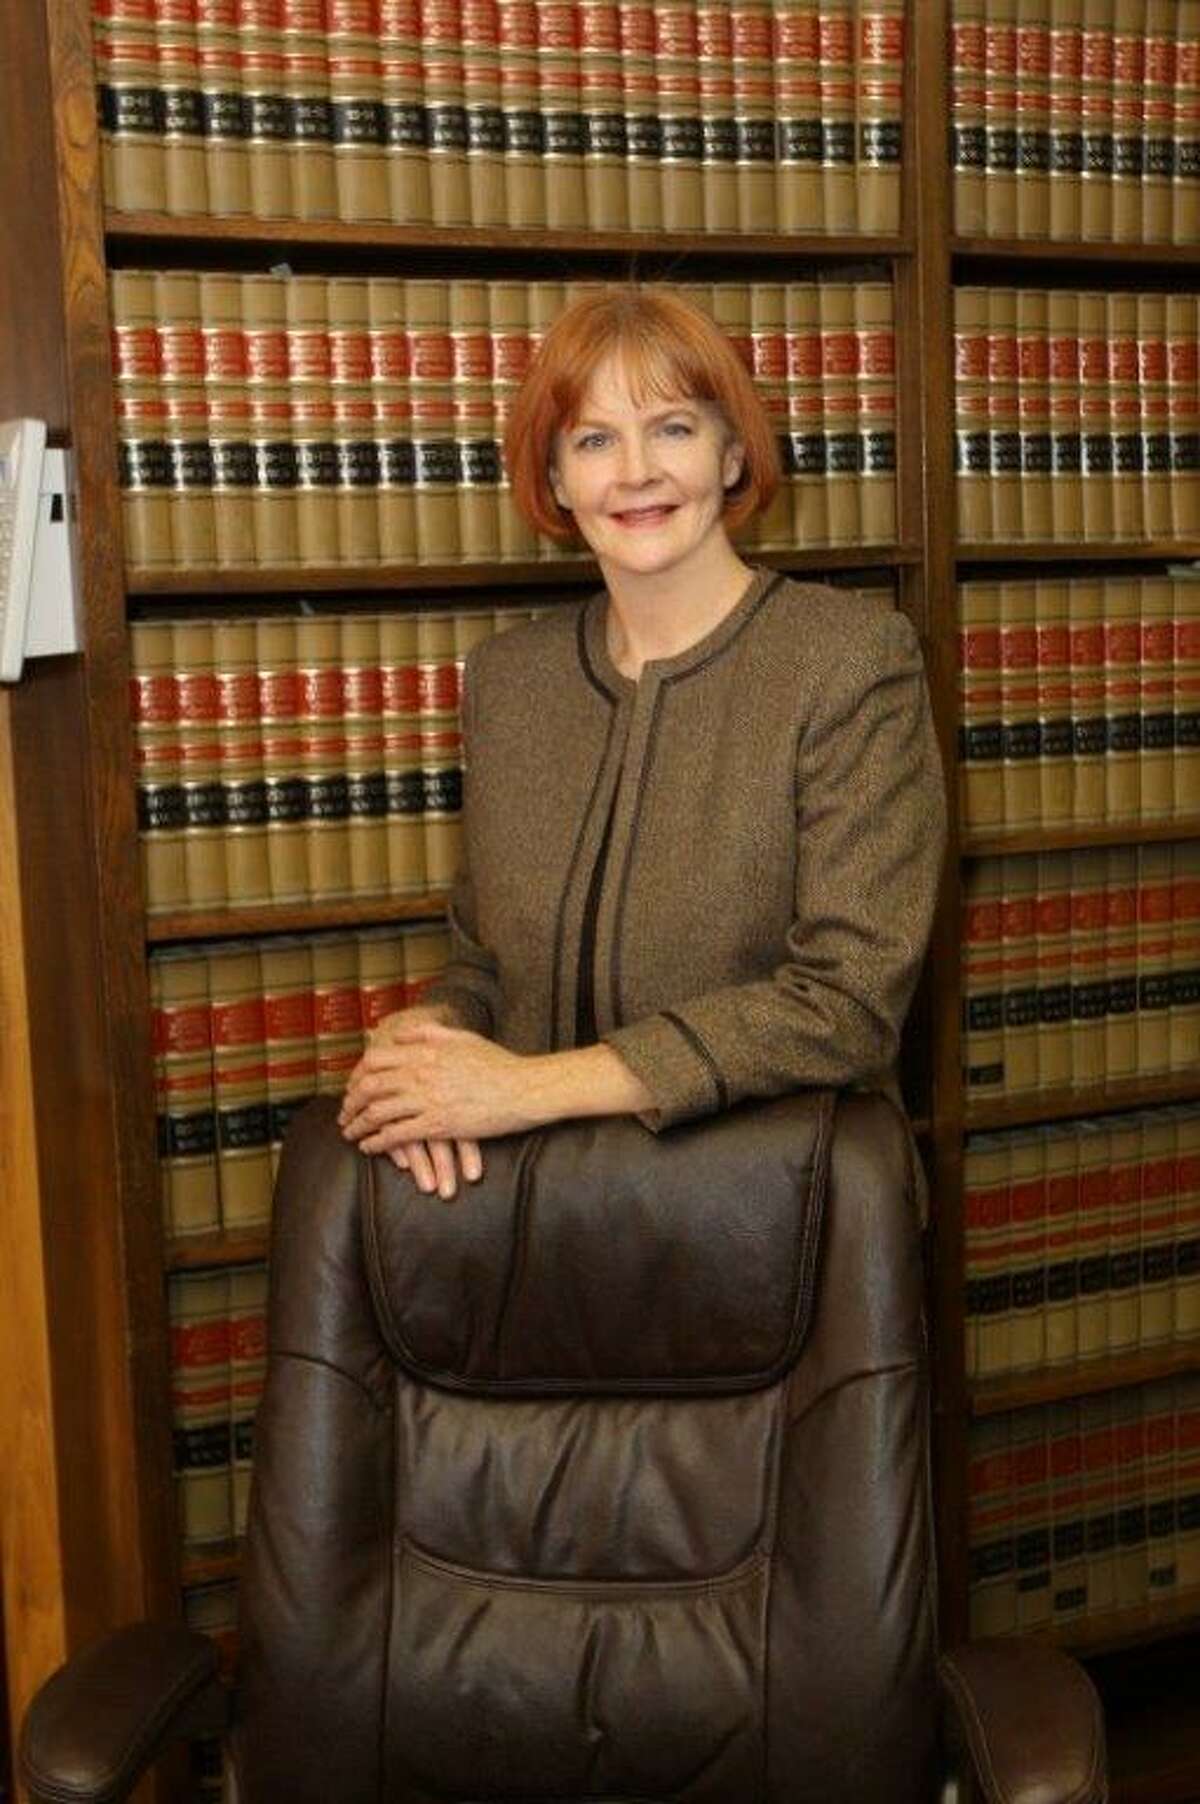 Judge Stephani Walsh is among the candidates the Editorial Board recommends for Bexar County civil court seats.